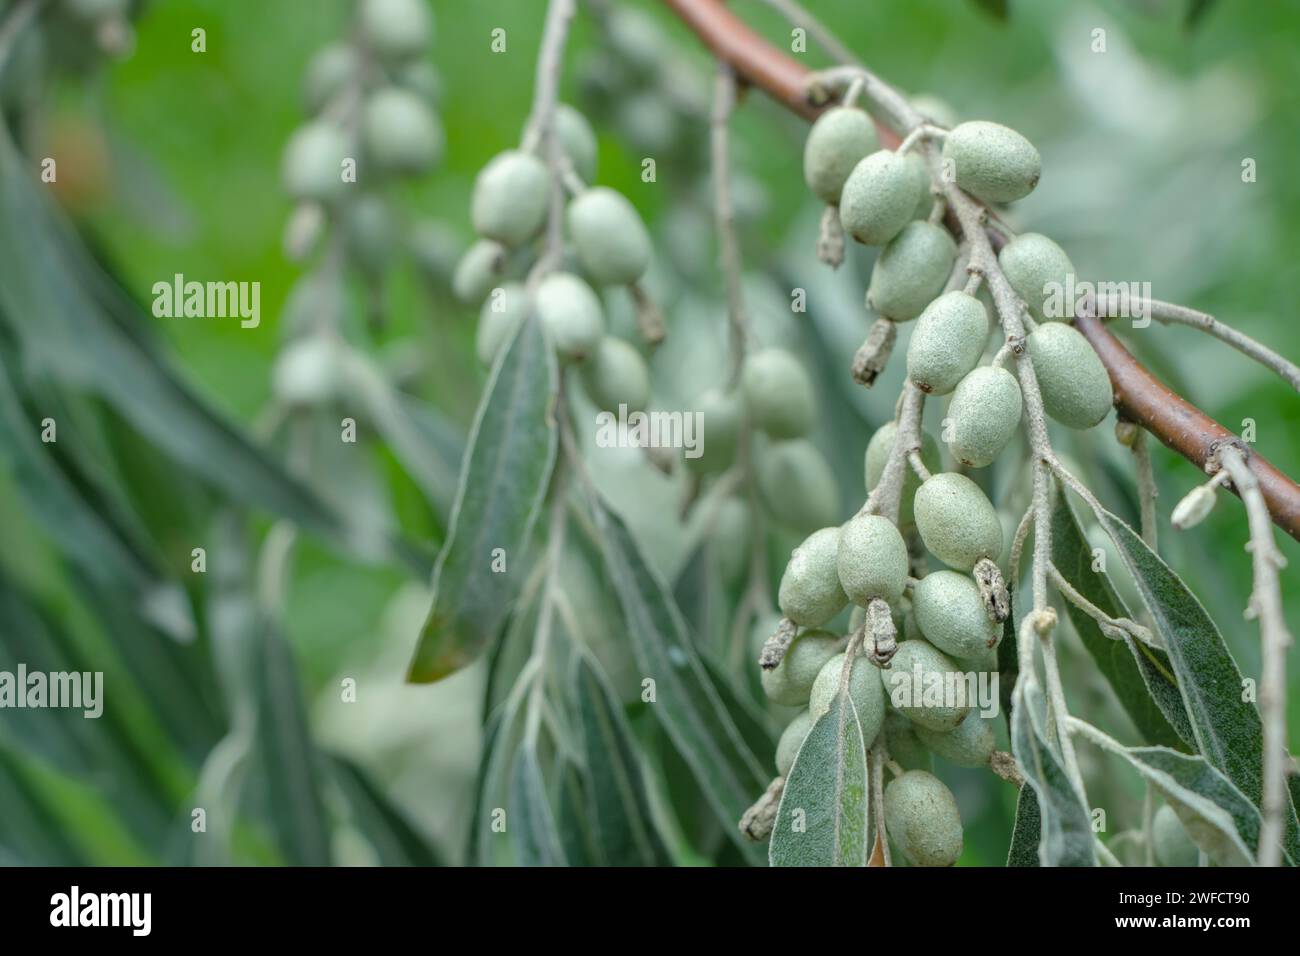 Closeup of Elaeagnus angustifolia commonly called Russian olive, silver berry, oleaster, Persian olive, or wild olive branch with green fruits Stock Photo